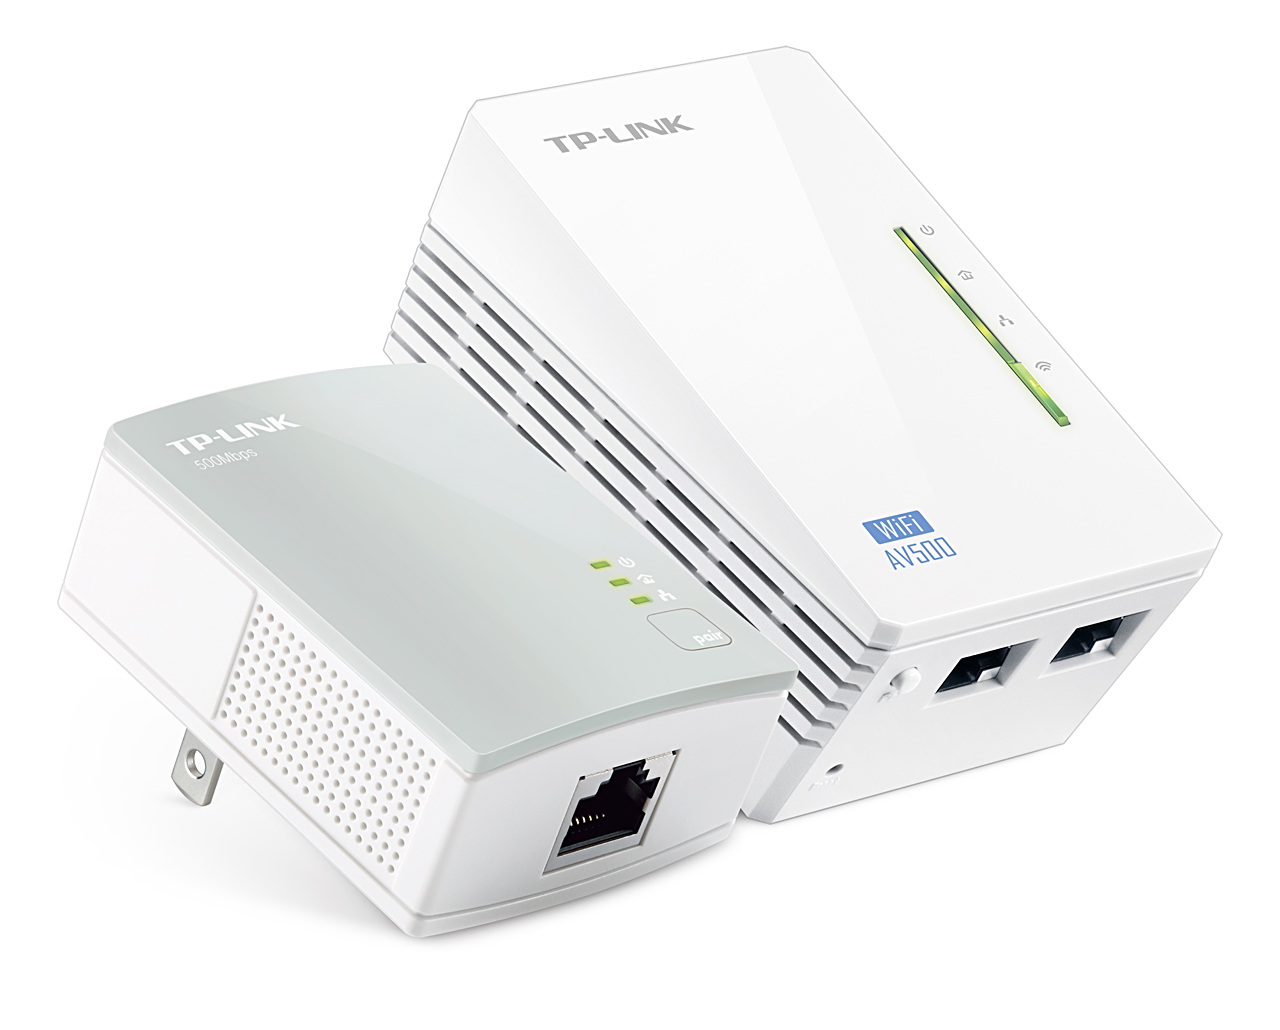 A TP-Link Wi-Fi extender device is shown with a home or office network to improve internet connectivity.